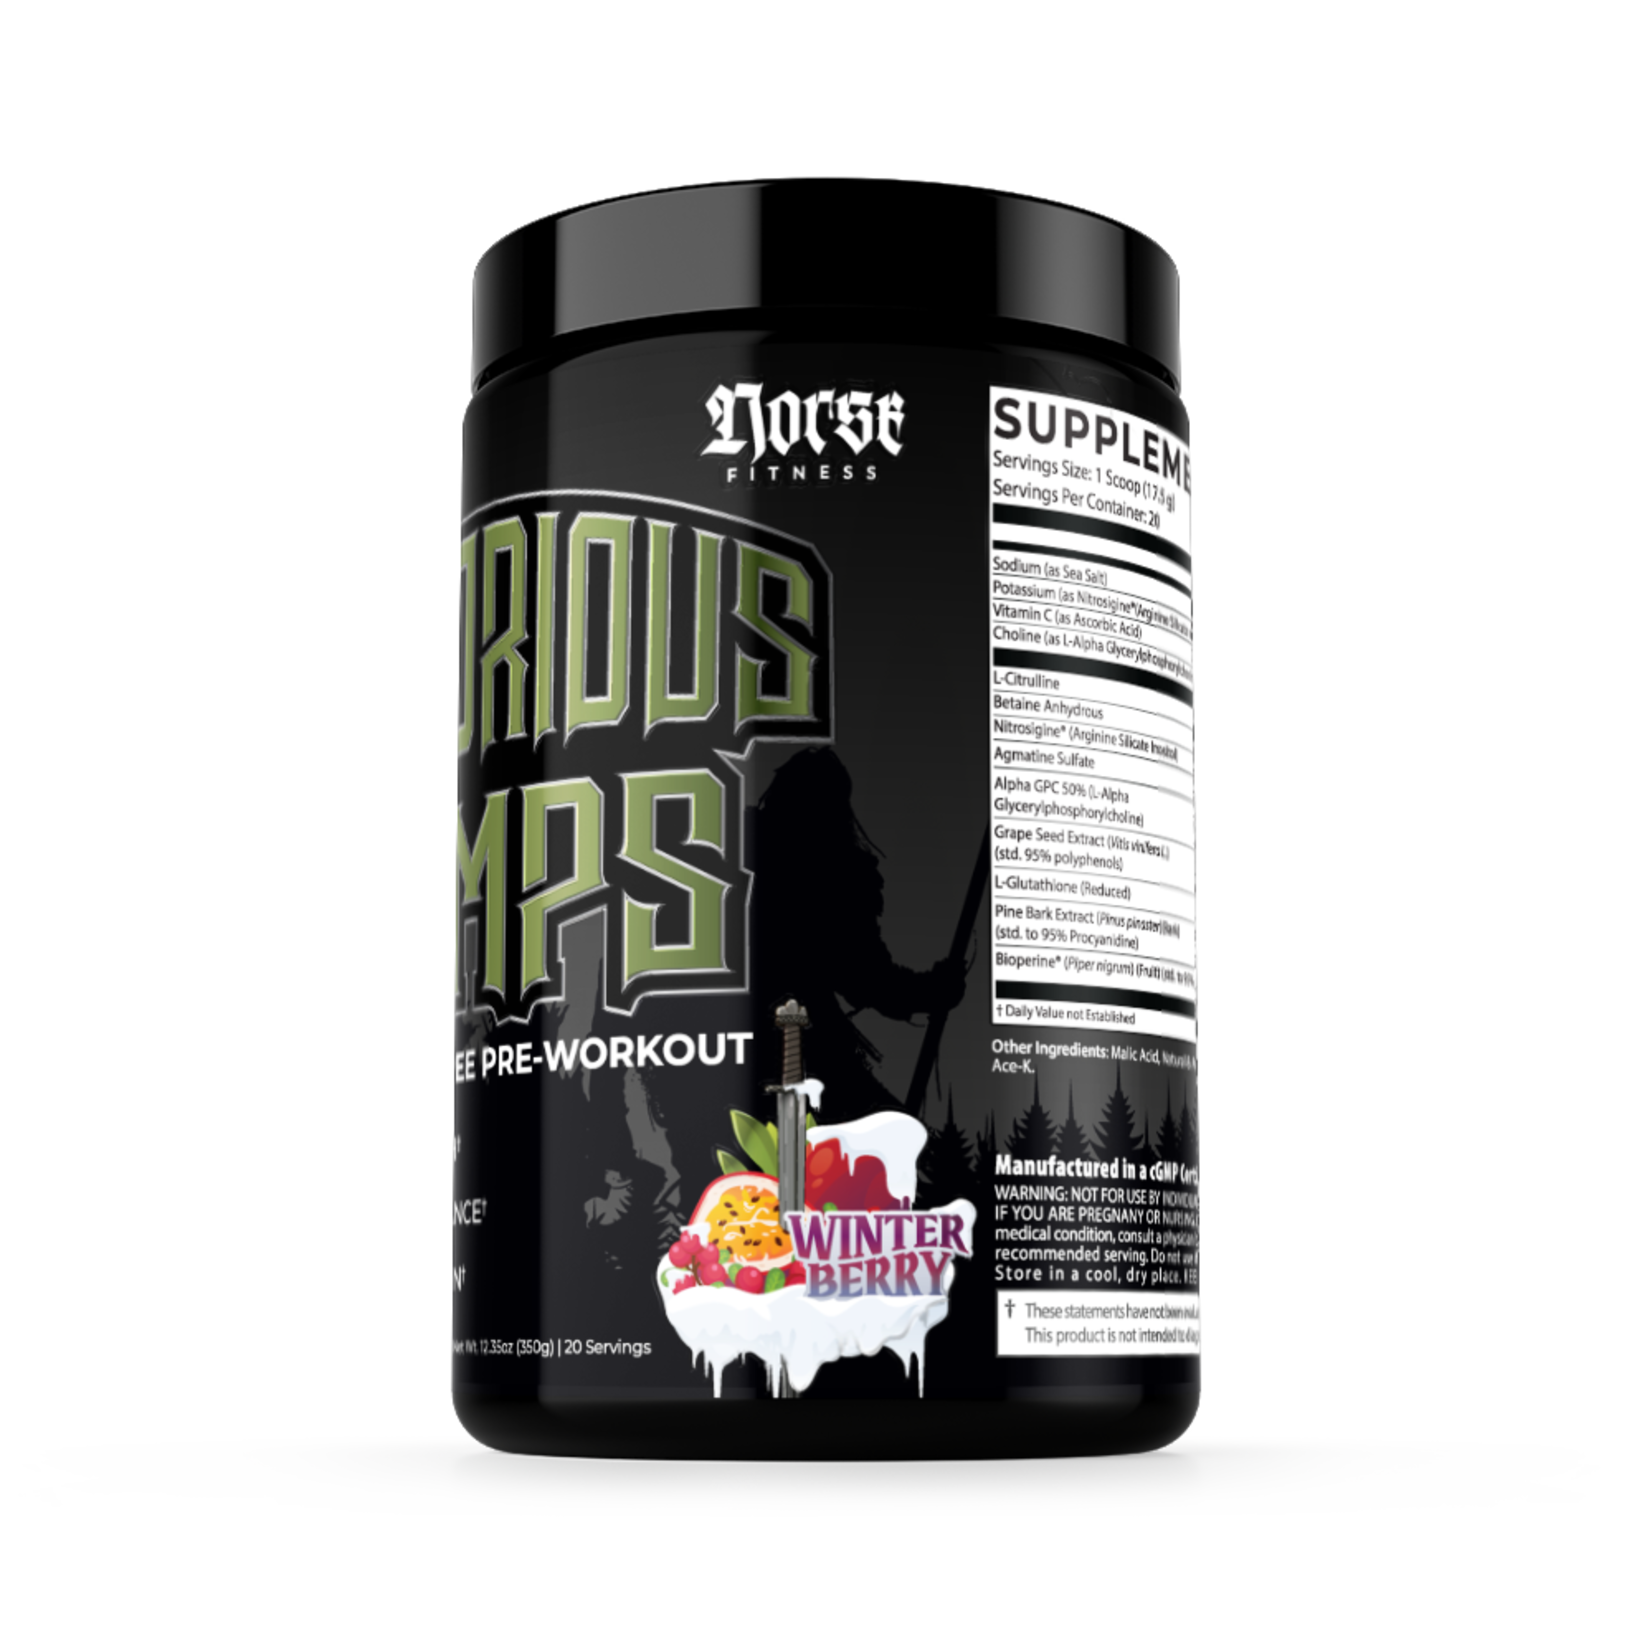 Norse Fitness Victorious Pumps Winter Berry